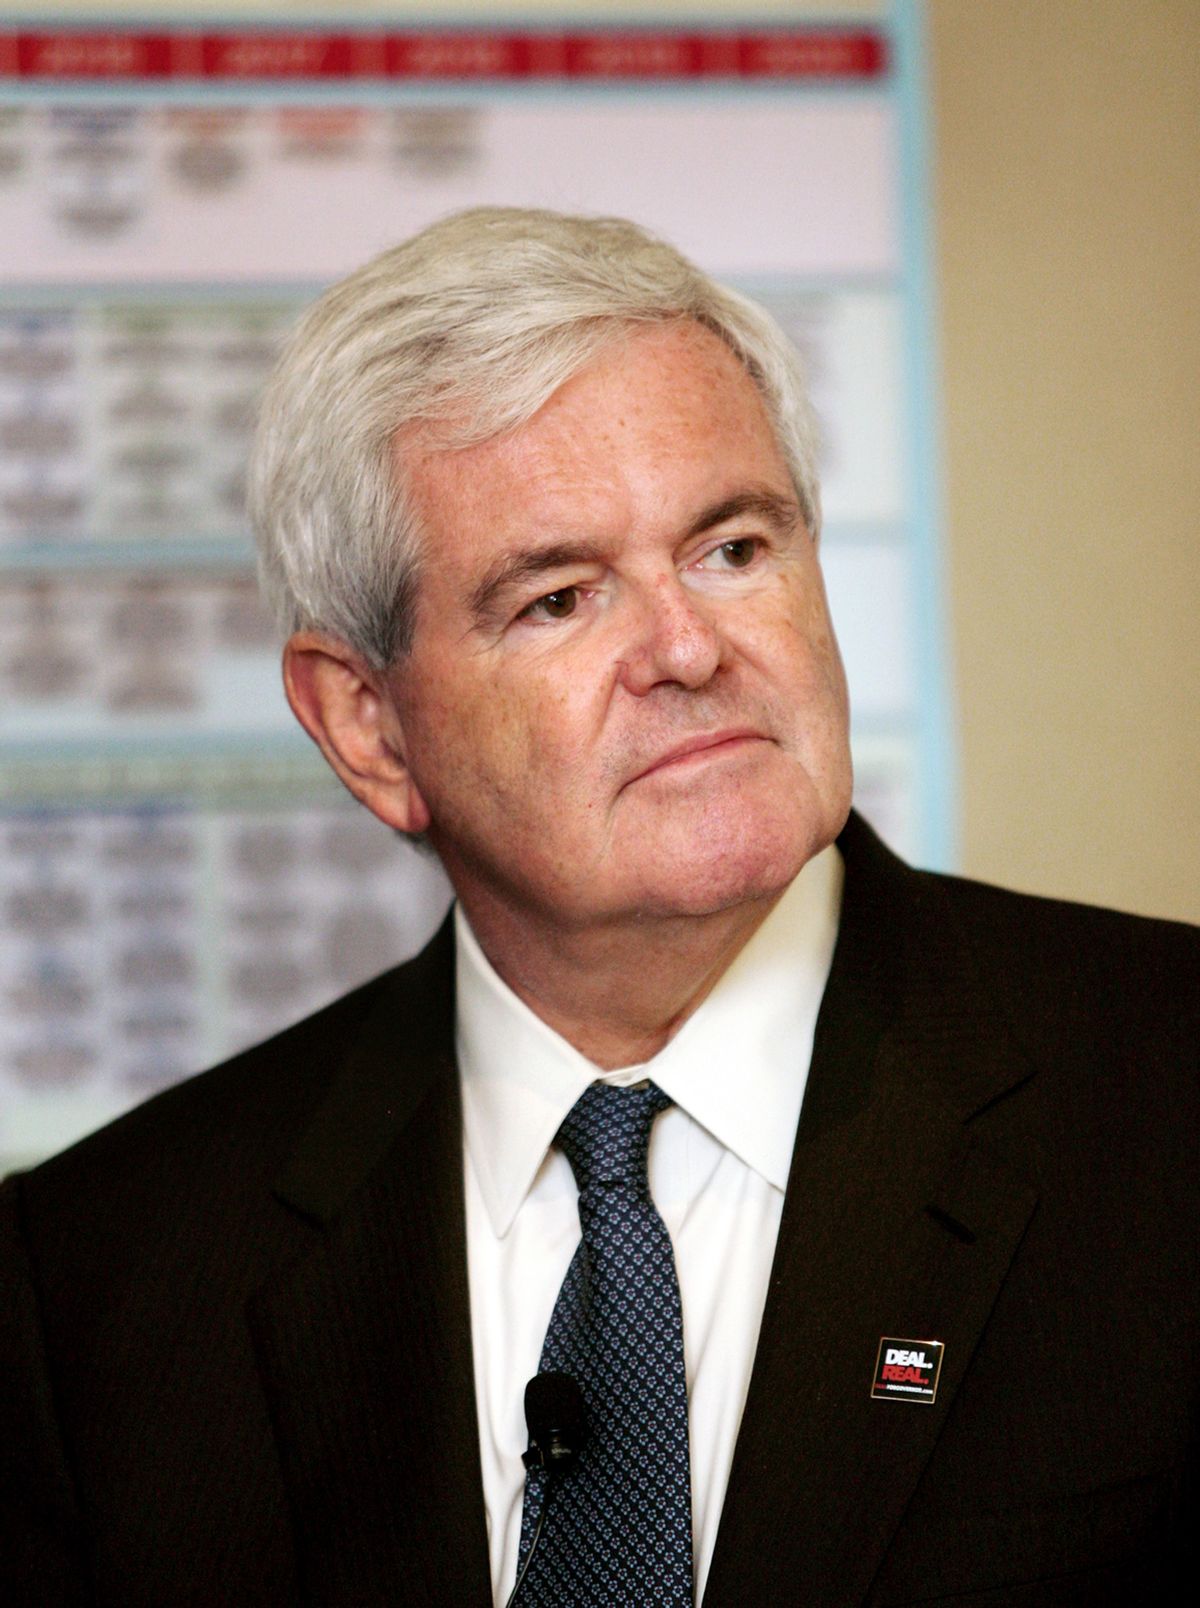 Newt Gingrich is the keynote speaker on the subject of the new federal health care law Tuesday, July 13, 2010 at a Georgia Chamber luncheon at the InterContinental Hotel in Atlanta, Ga. (AP Photo/Jenni Girtman)  (Jenni Girtman)